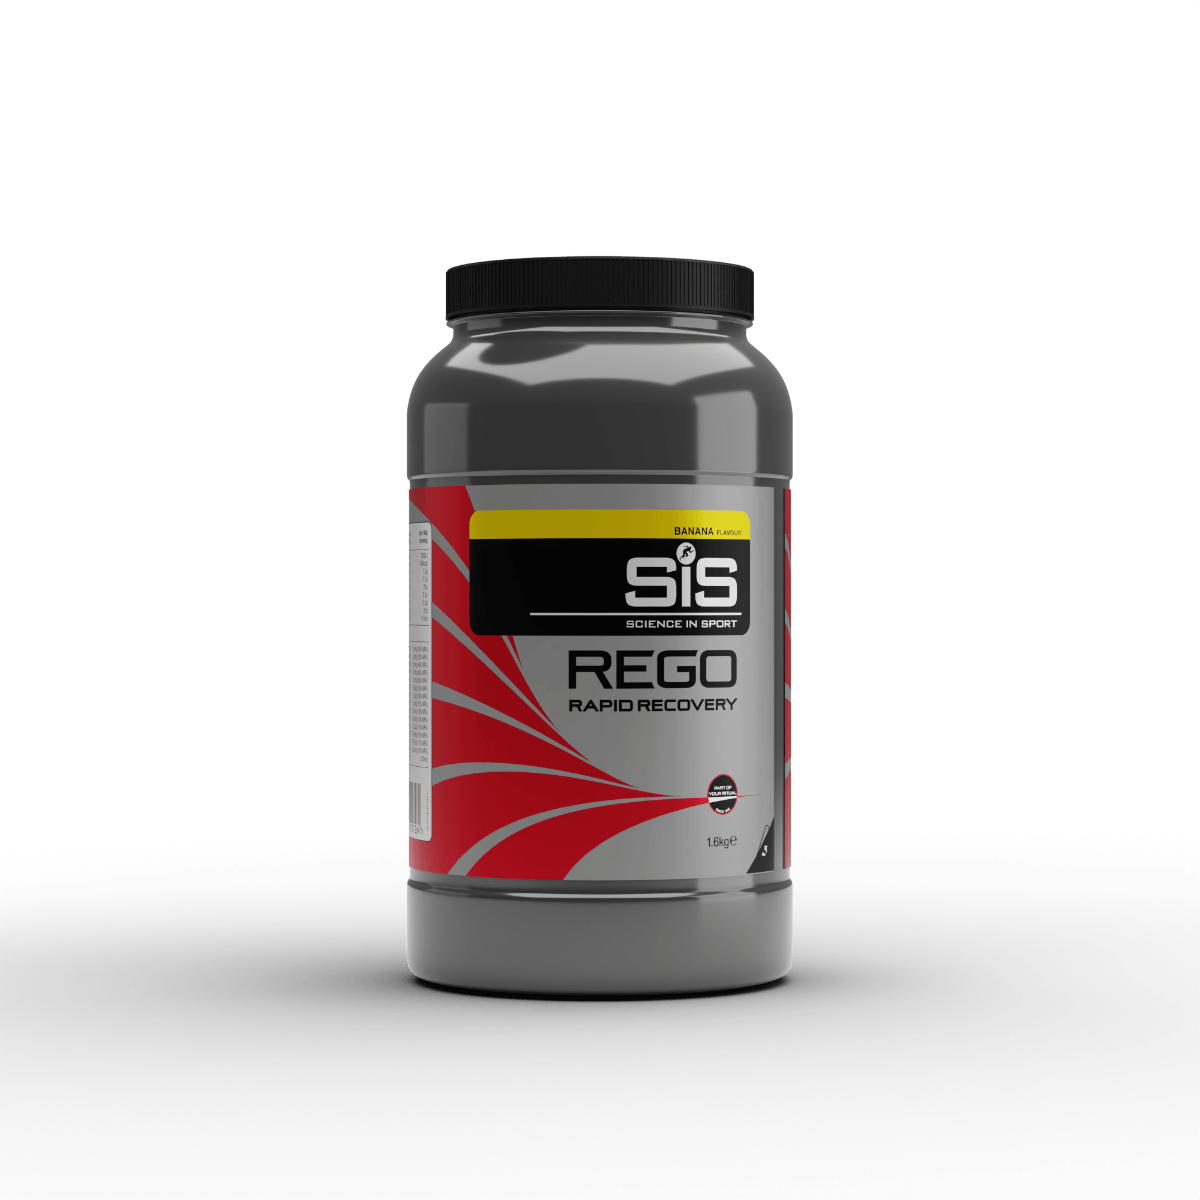 SiS Protein Drink 32 Serving Tub (1.6kg) / Banana REGO Rapid Recovery XMiles